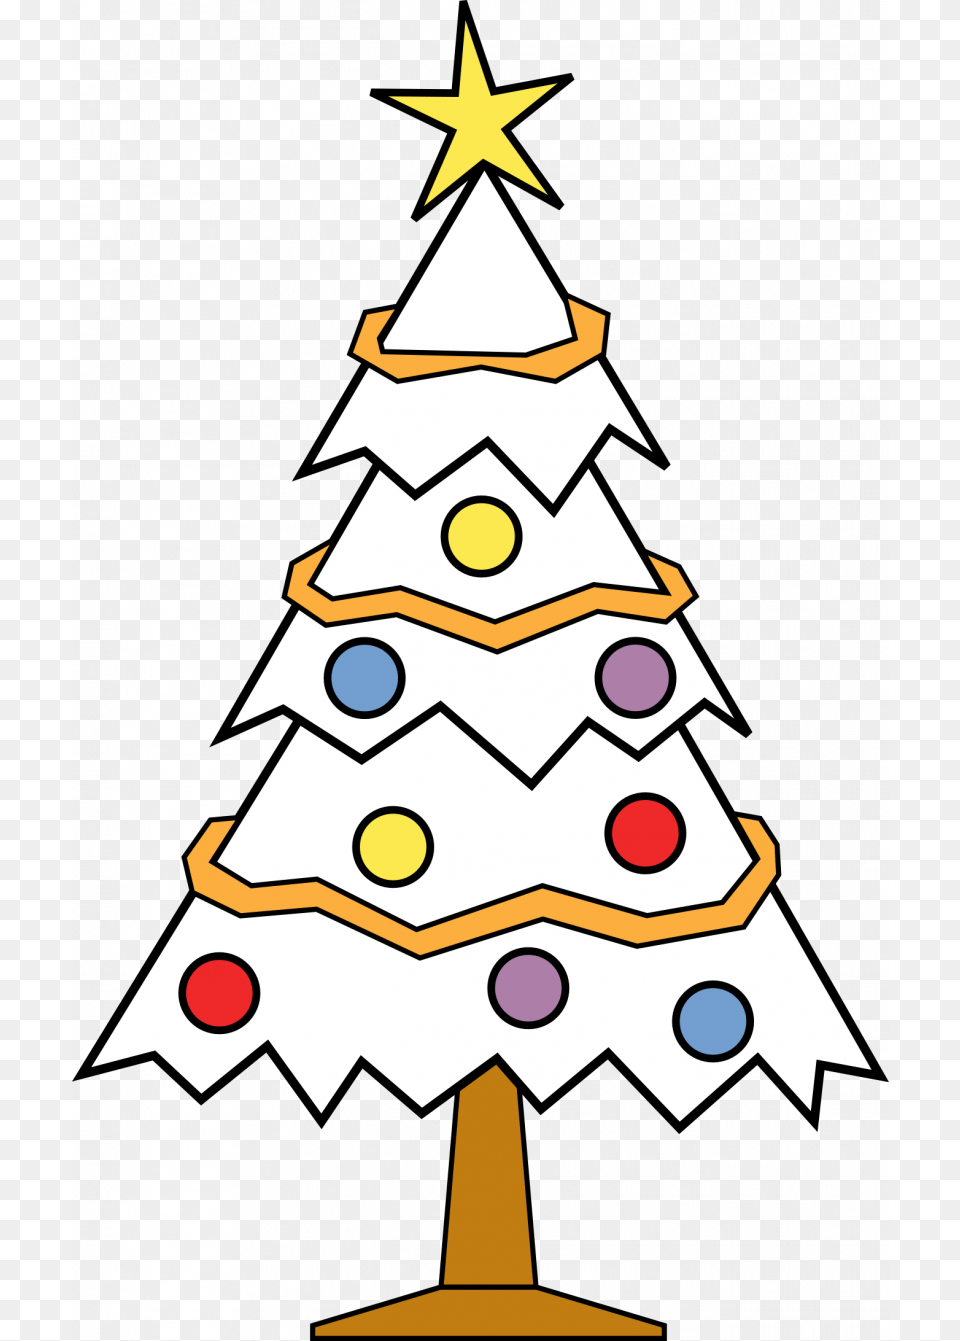 Christmas Ornament Black And White Tree Ornament Clipart Black, Festival, Christmas Decorations, Symbol, Star Symbol Free Png